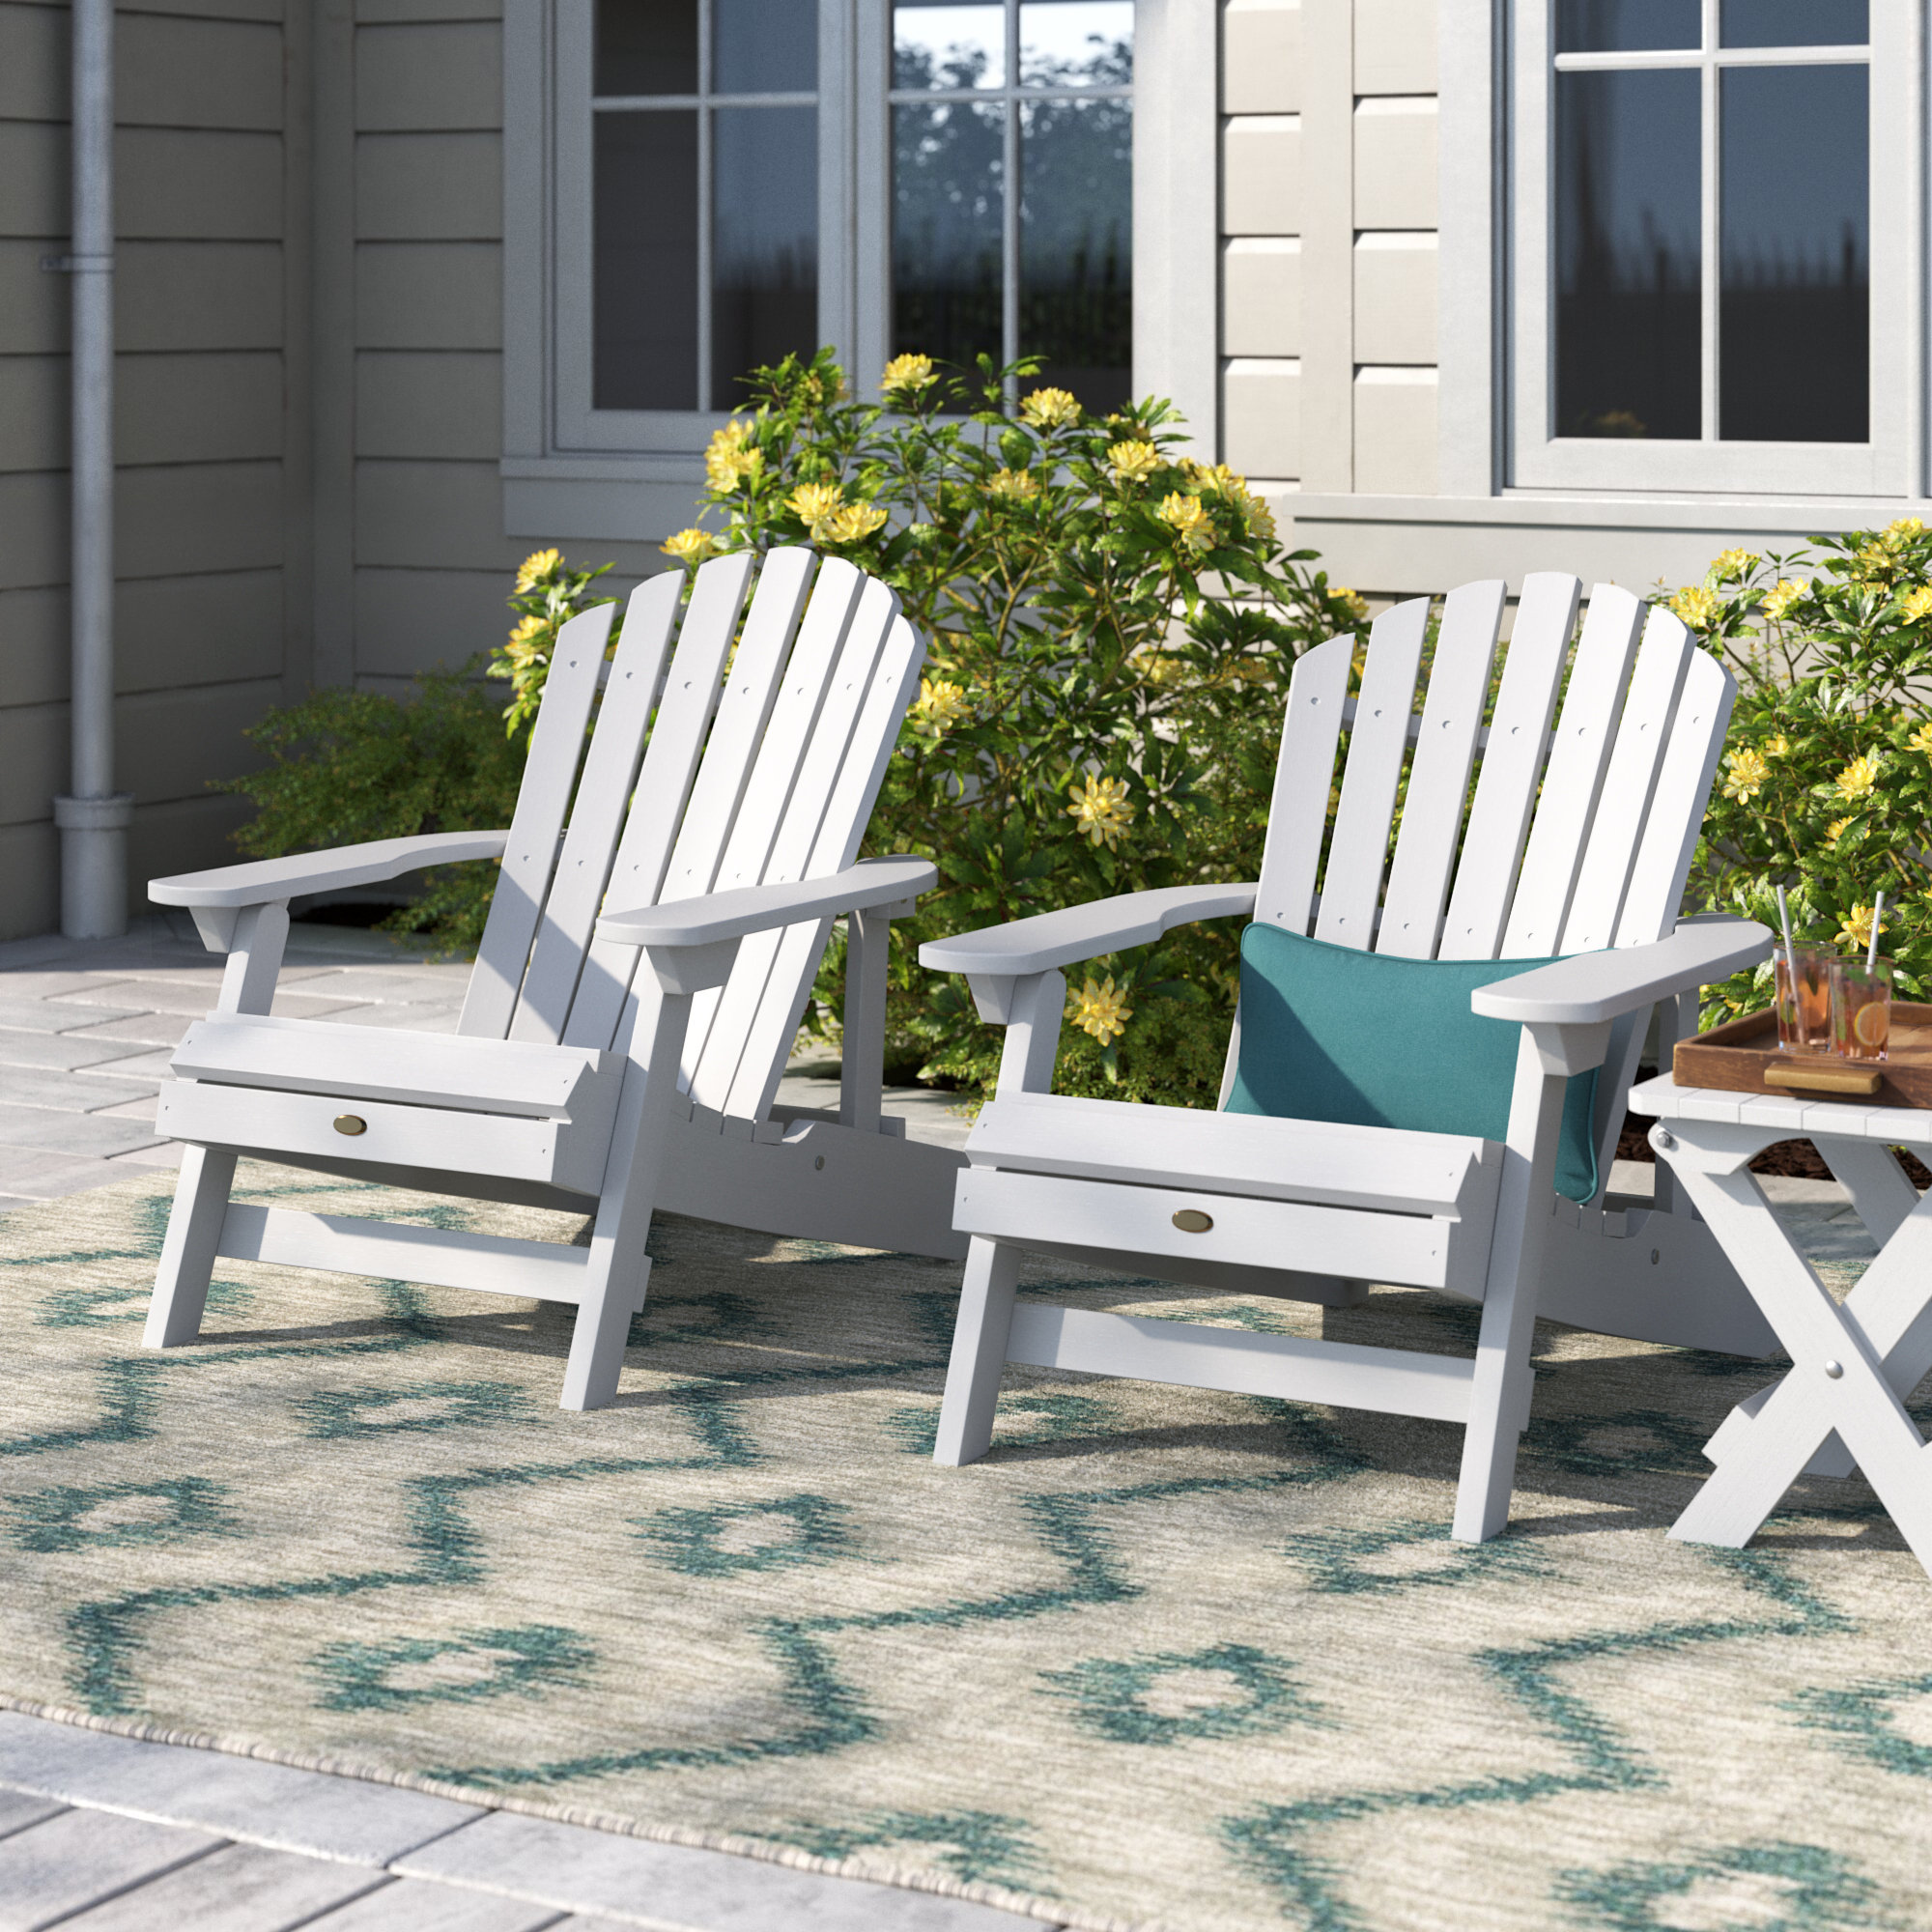 Top Rated Adirondack Chairs 